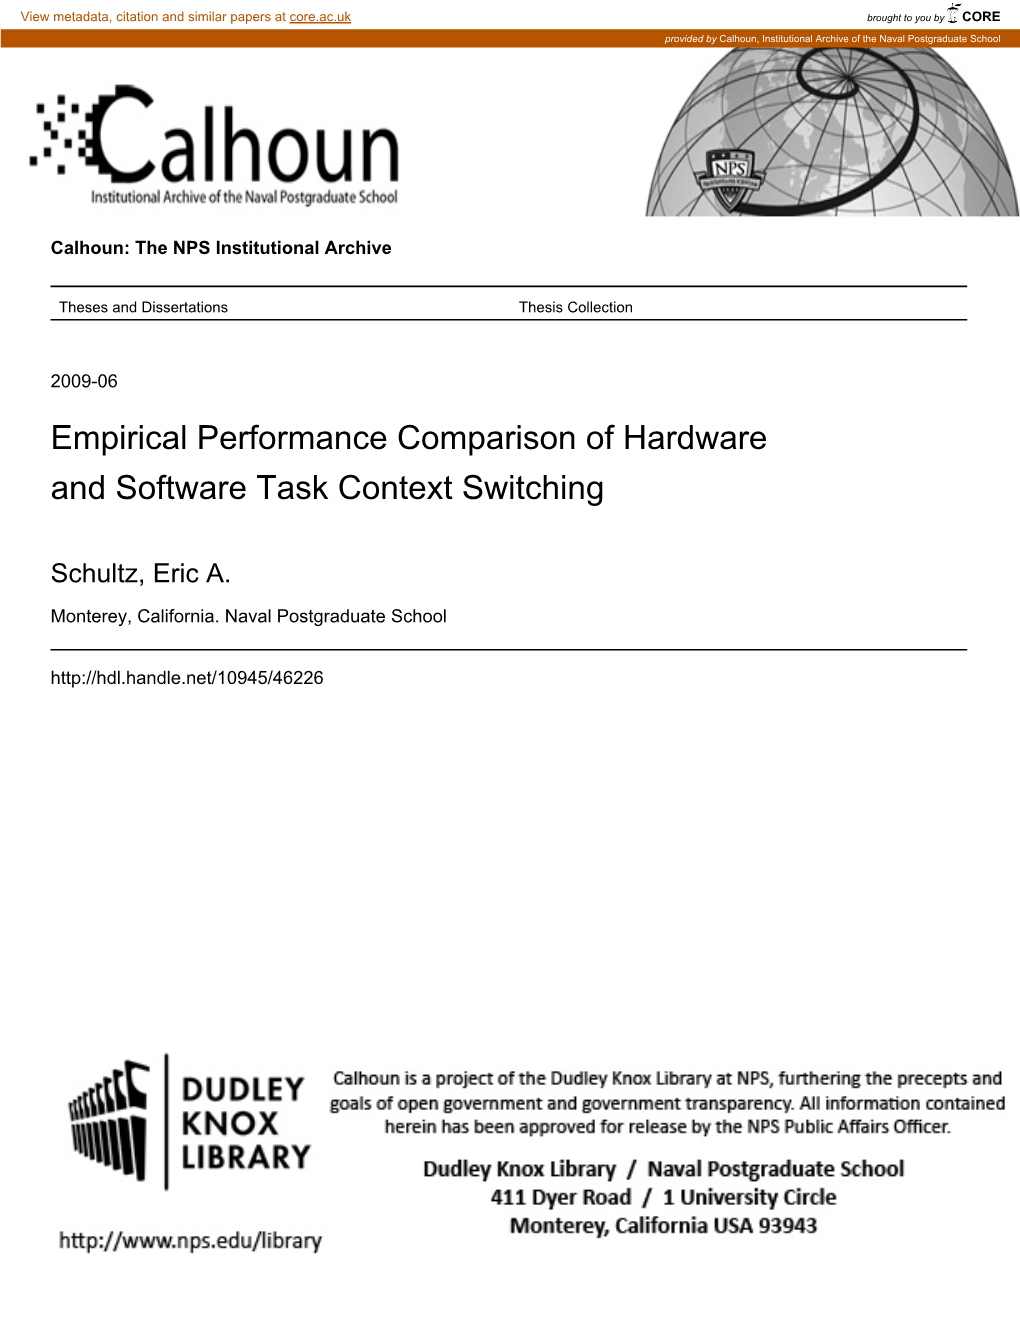 Empirical Performance Comparison of Hardware and Software Task Context Switching